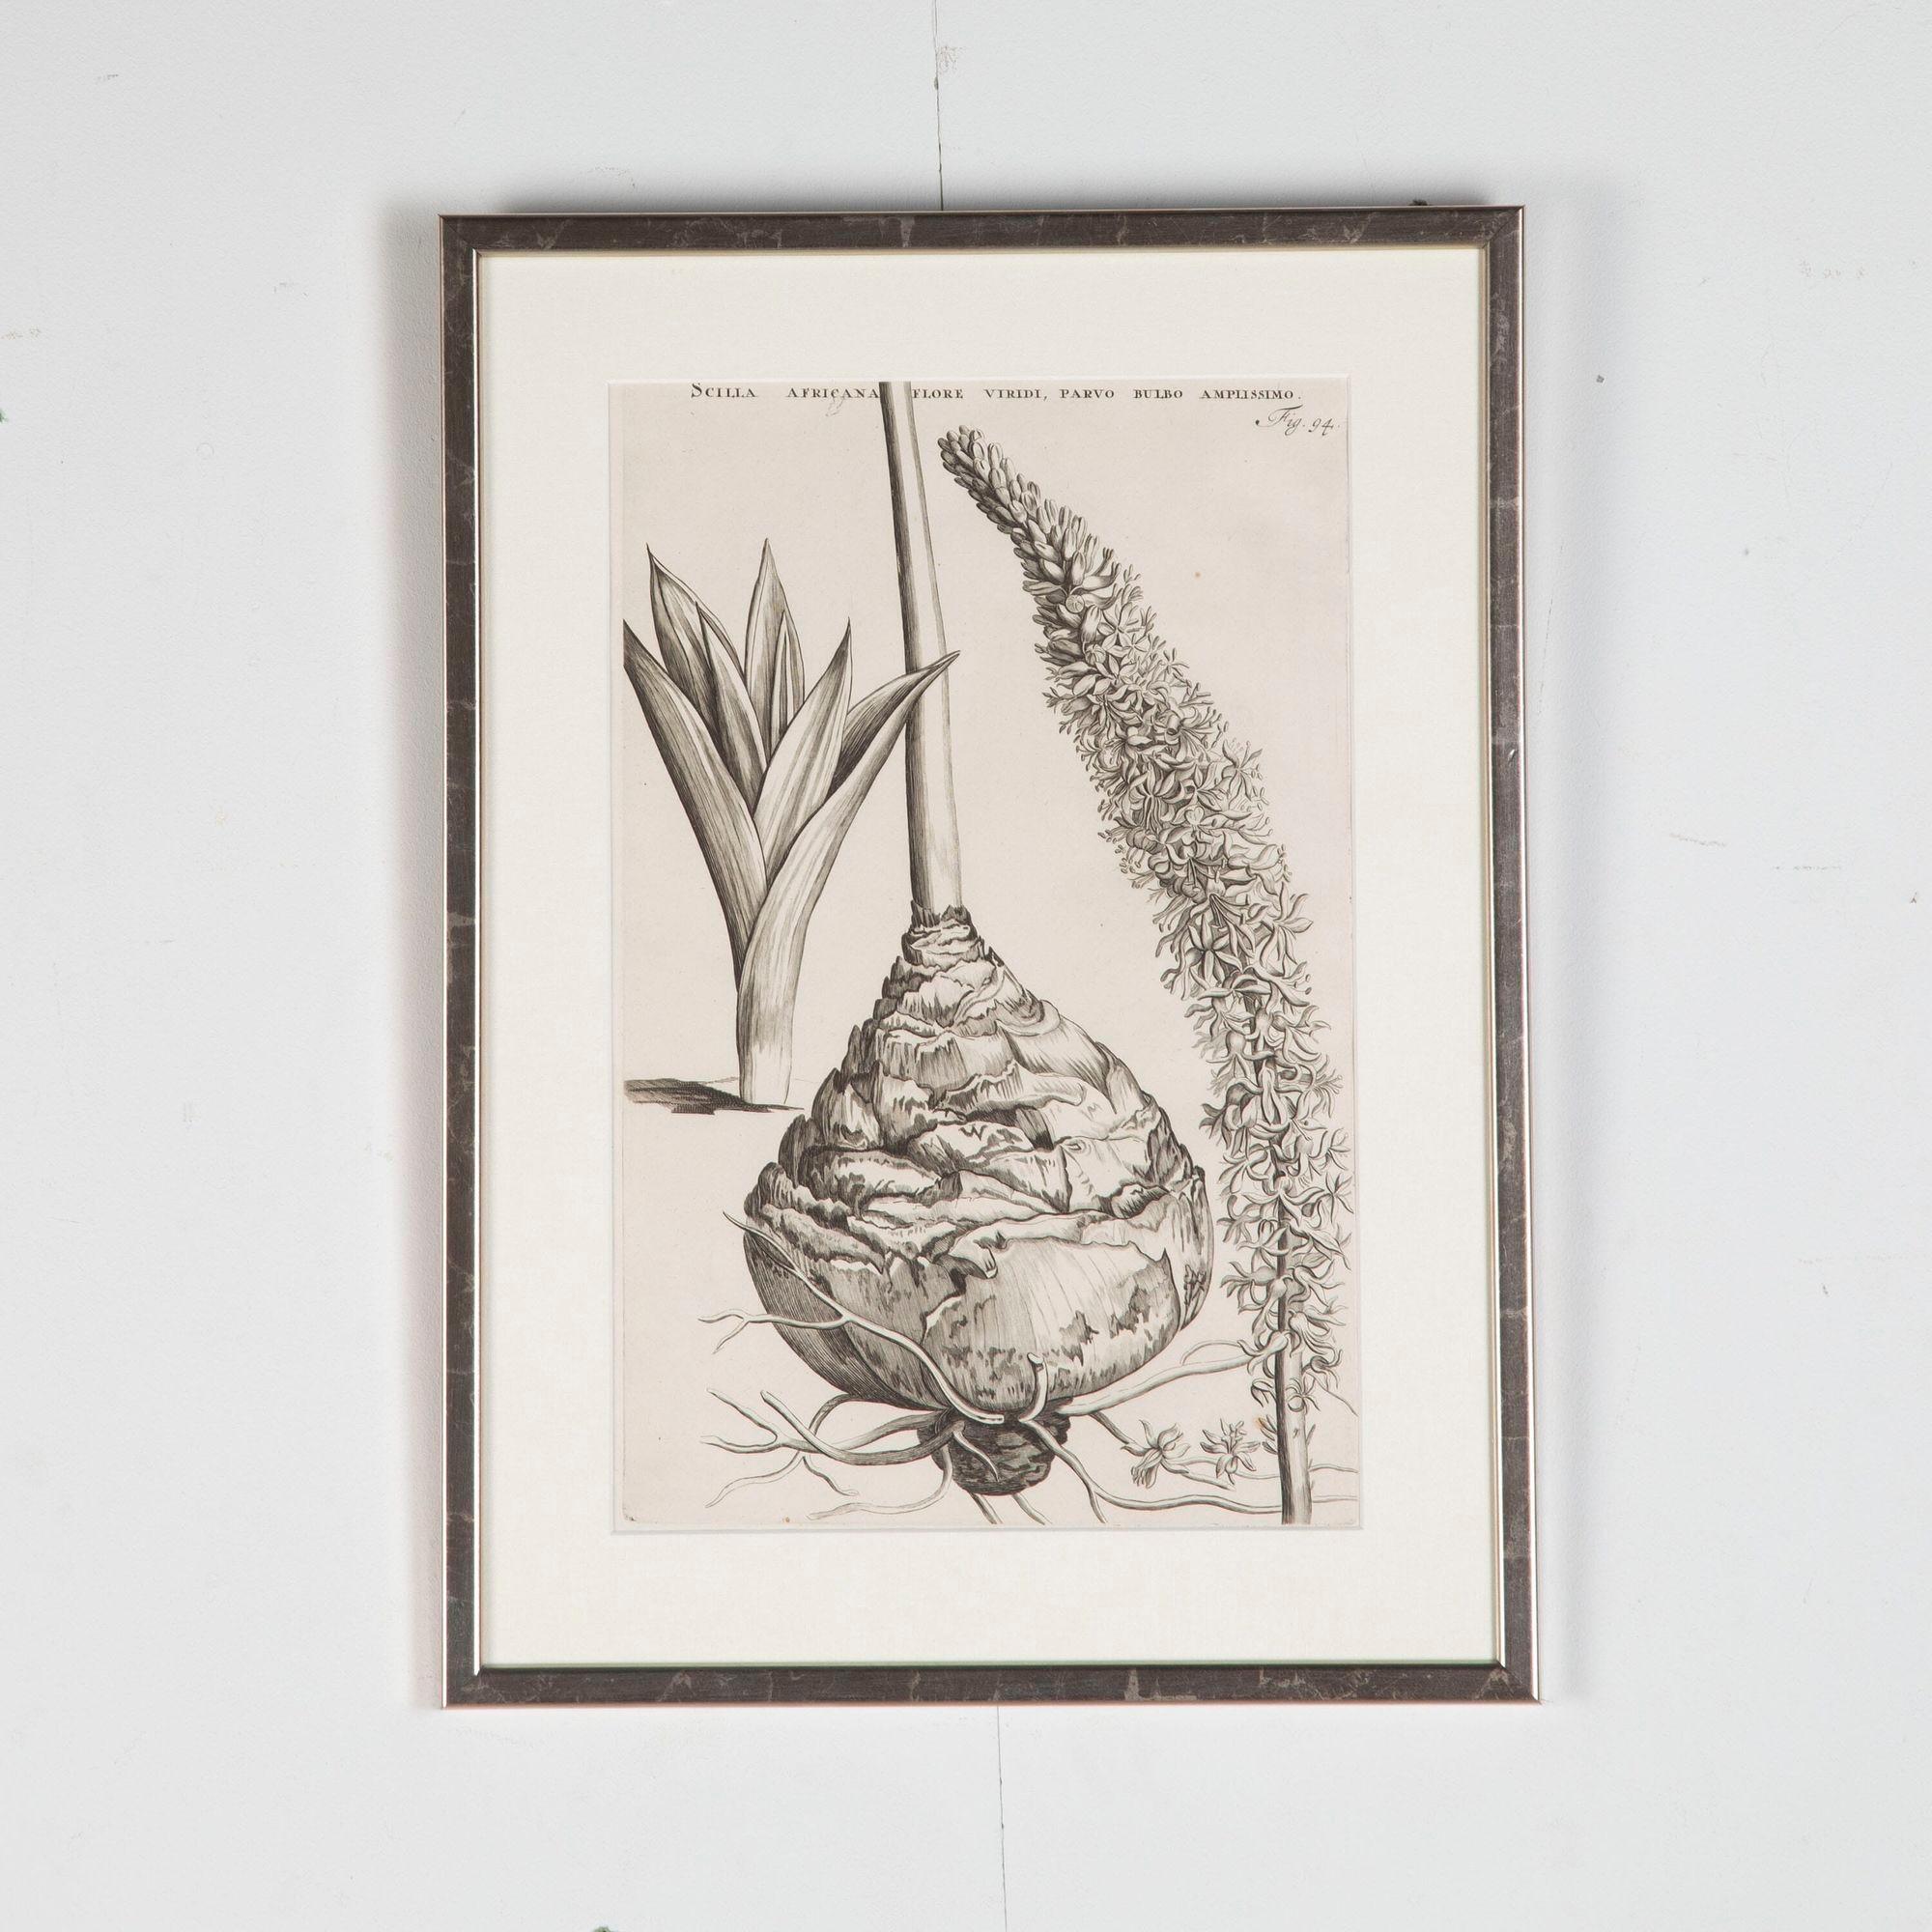 Beautiful set of 4, 17th century botanical engravings by Jan and Caspar Commelin.
Presented in silver frames with hessian mounts and AR70 Artglass for optimal clarity.
Jan Commelin (1629-1692) was Director of the Amsterdam Physic Garden at a time